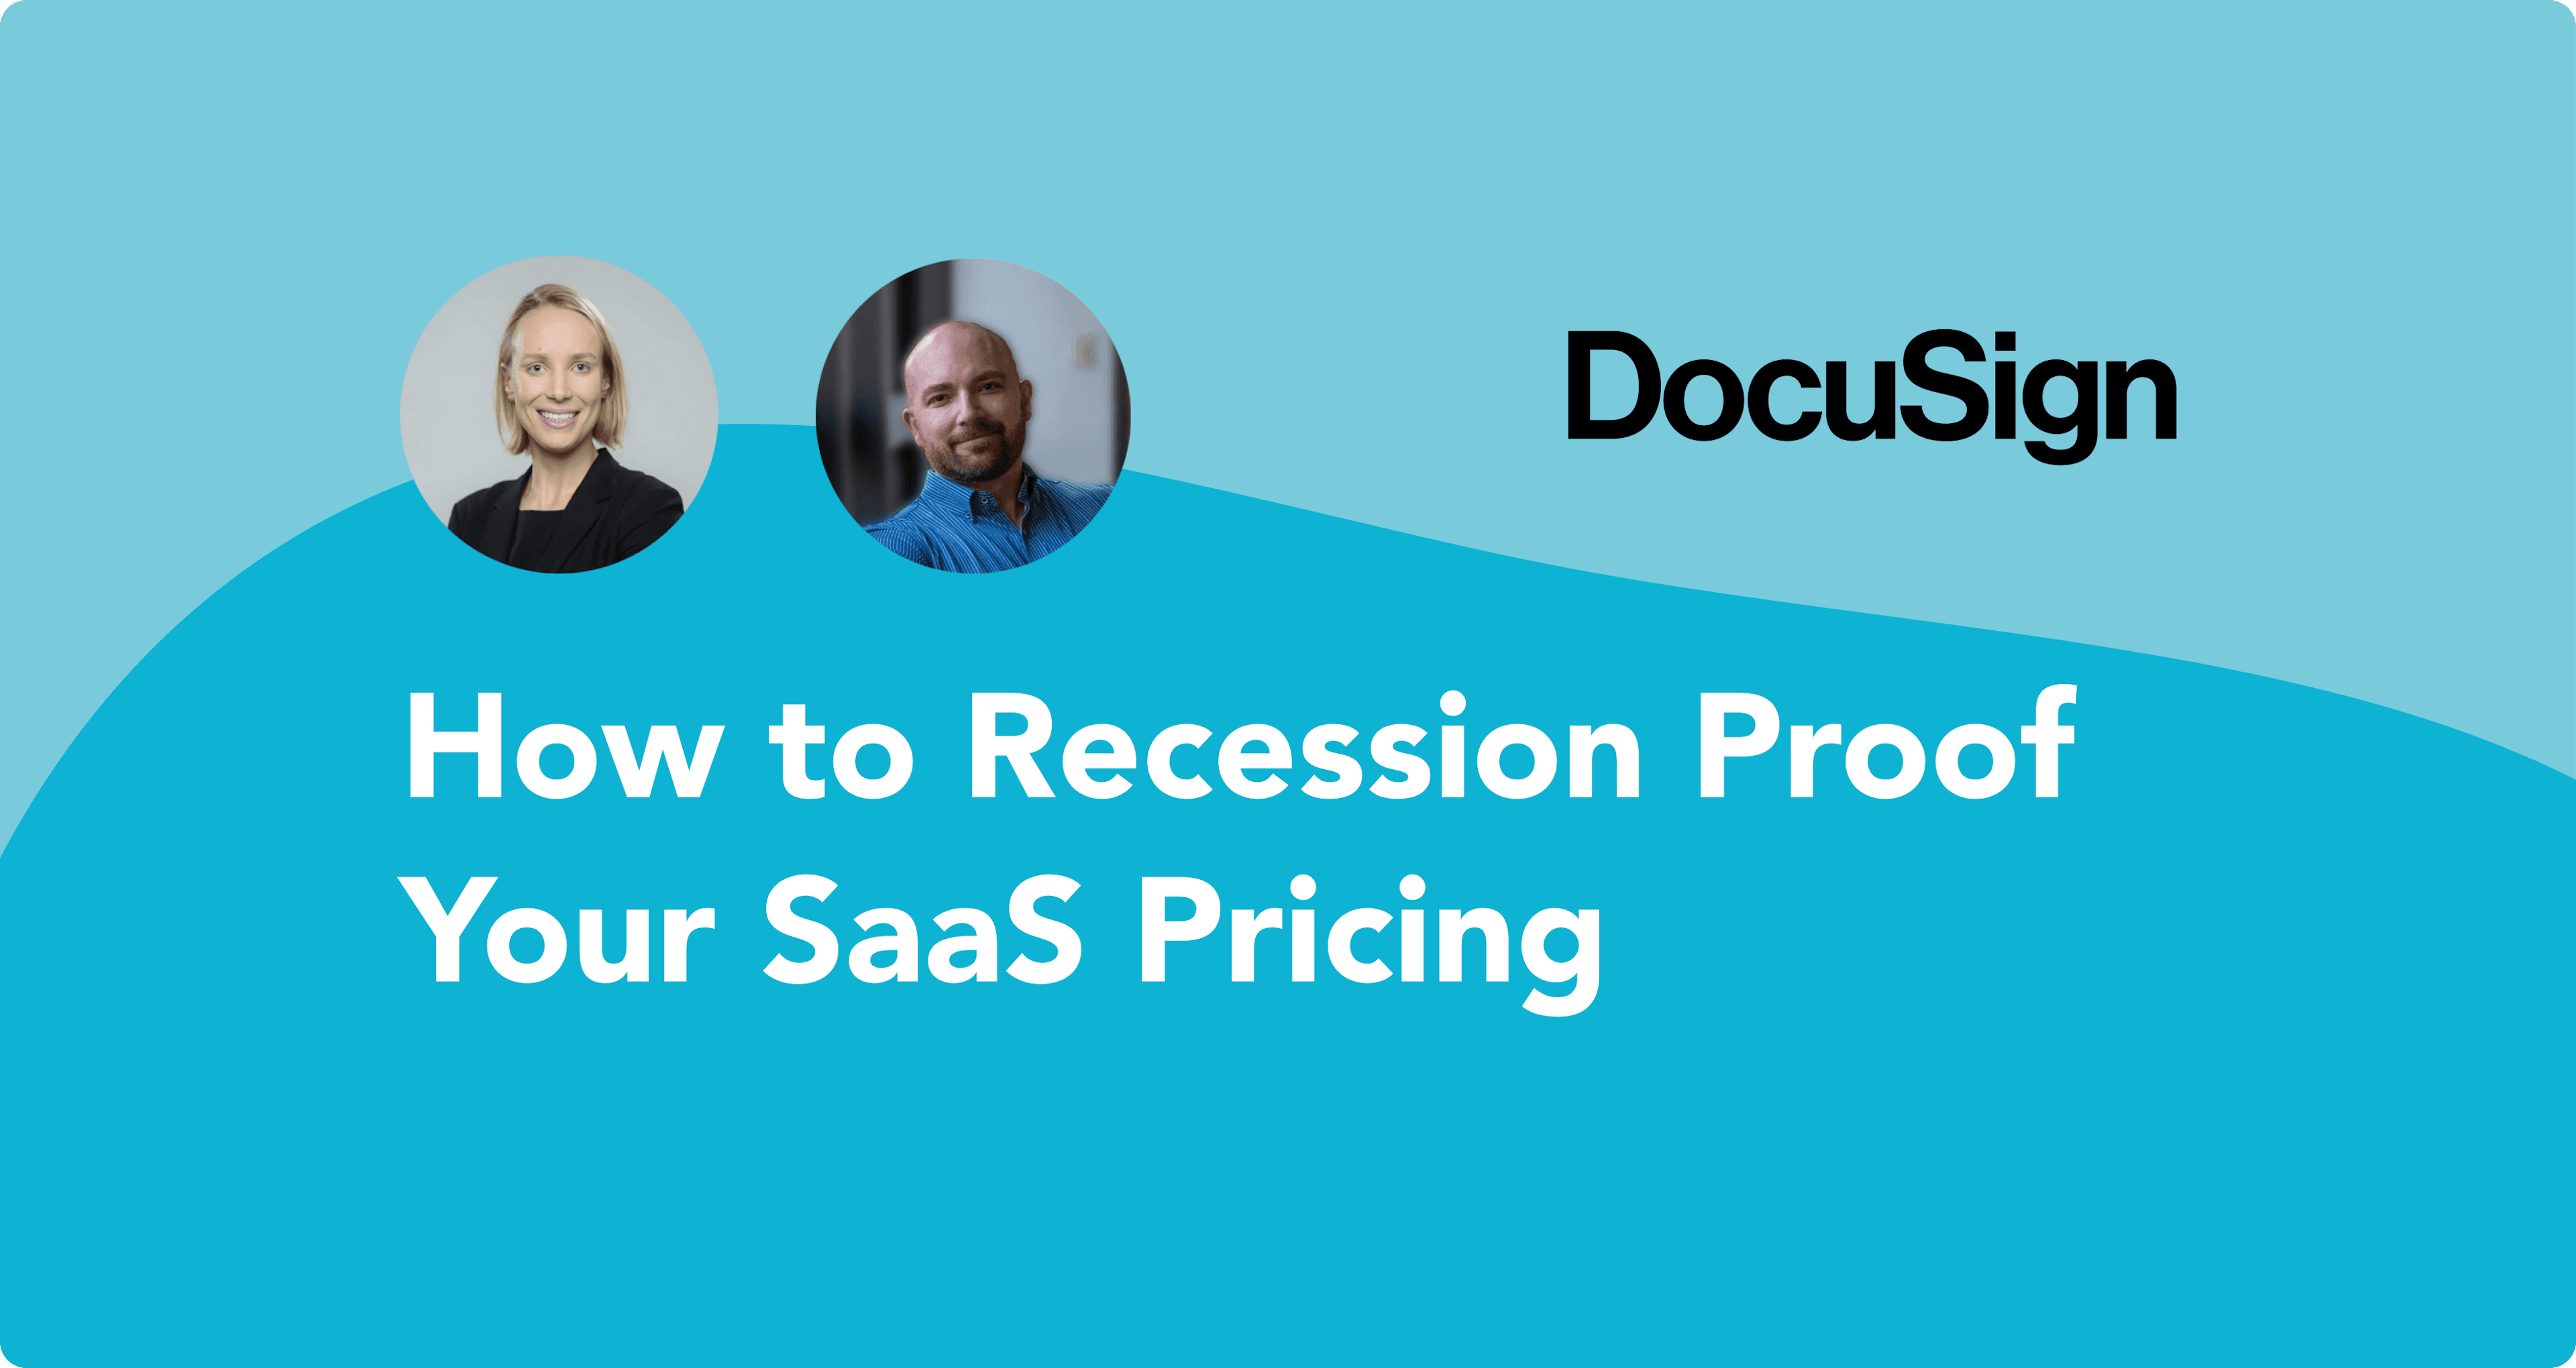 How to Recession Proof Your SaaS Pricing: Five Tips from DocuSign’s Pricing Leads